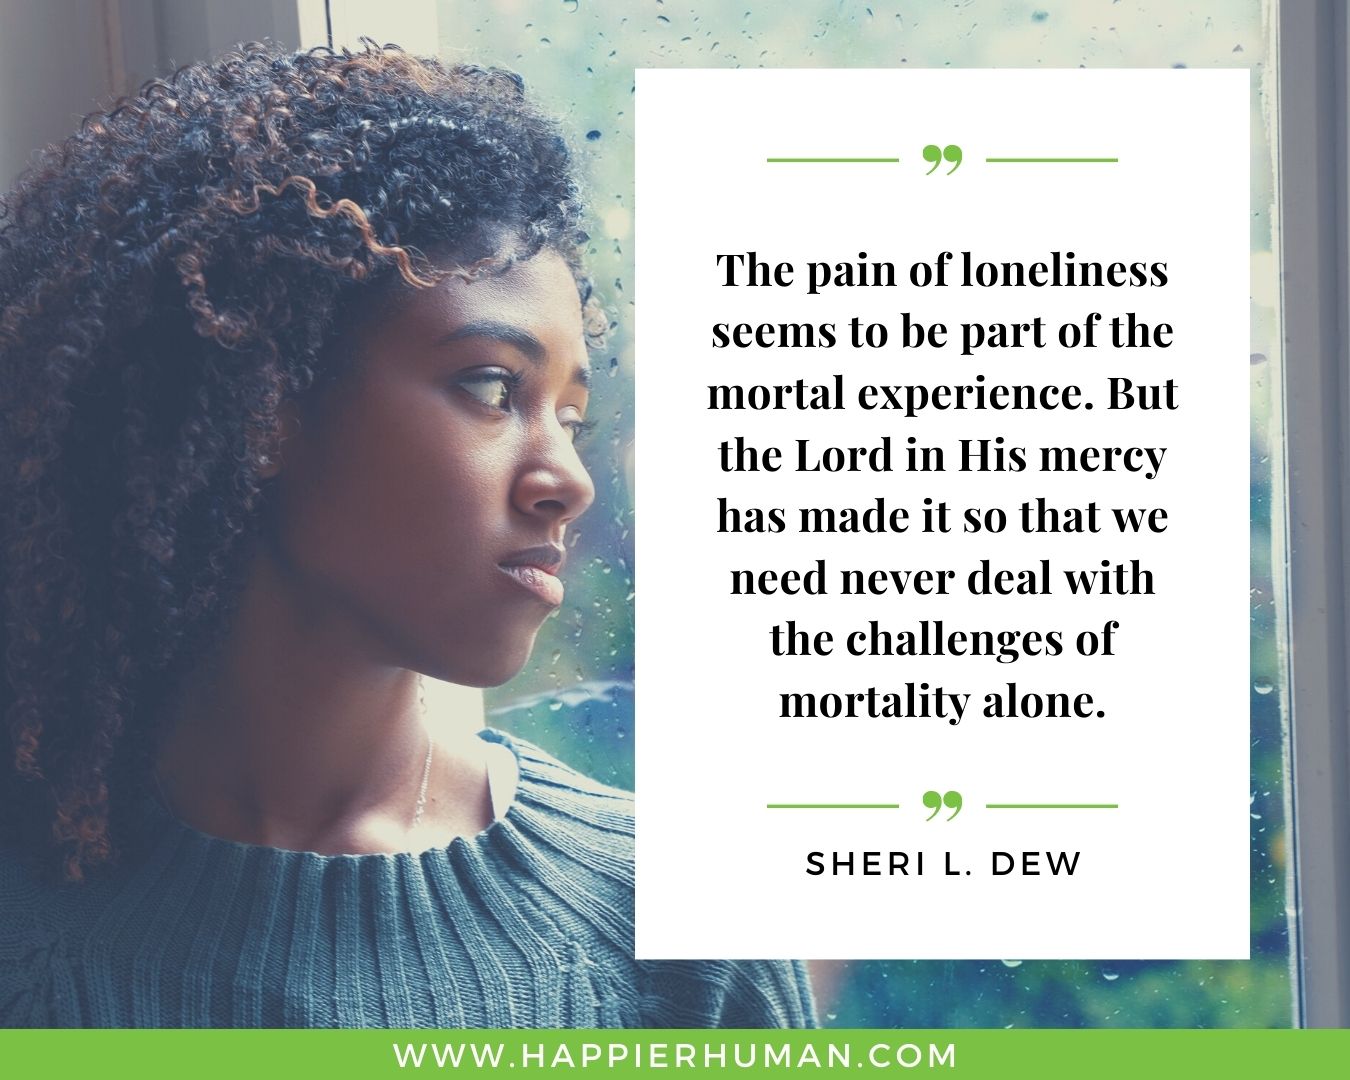 Loneliness Quotes - “The pain of loneliness seems to be part of the mortal experience. But the Lord in His mercy has made it so that we need never deal with the challenges of mortality alone.” – Sheri L. Dew